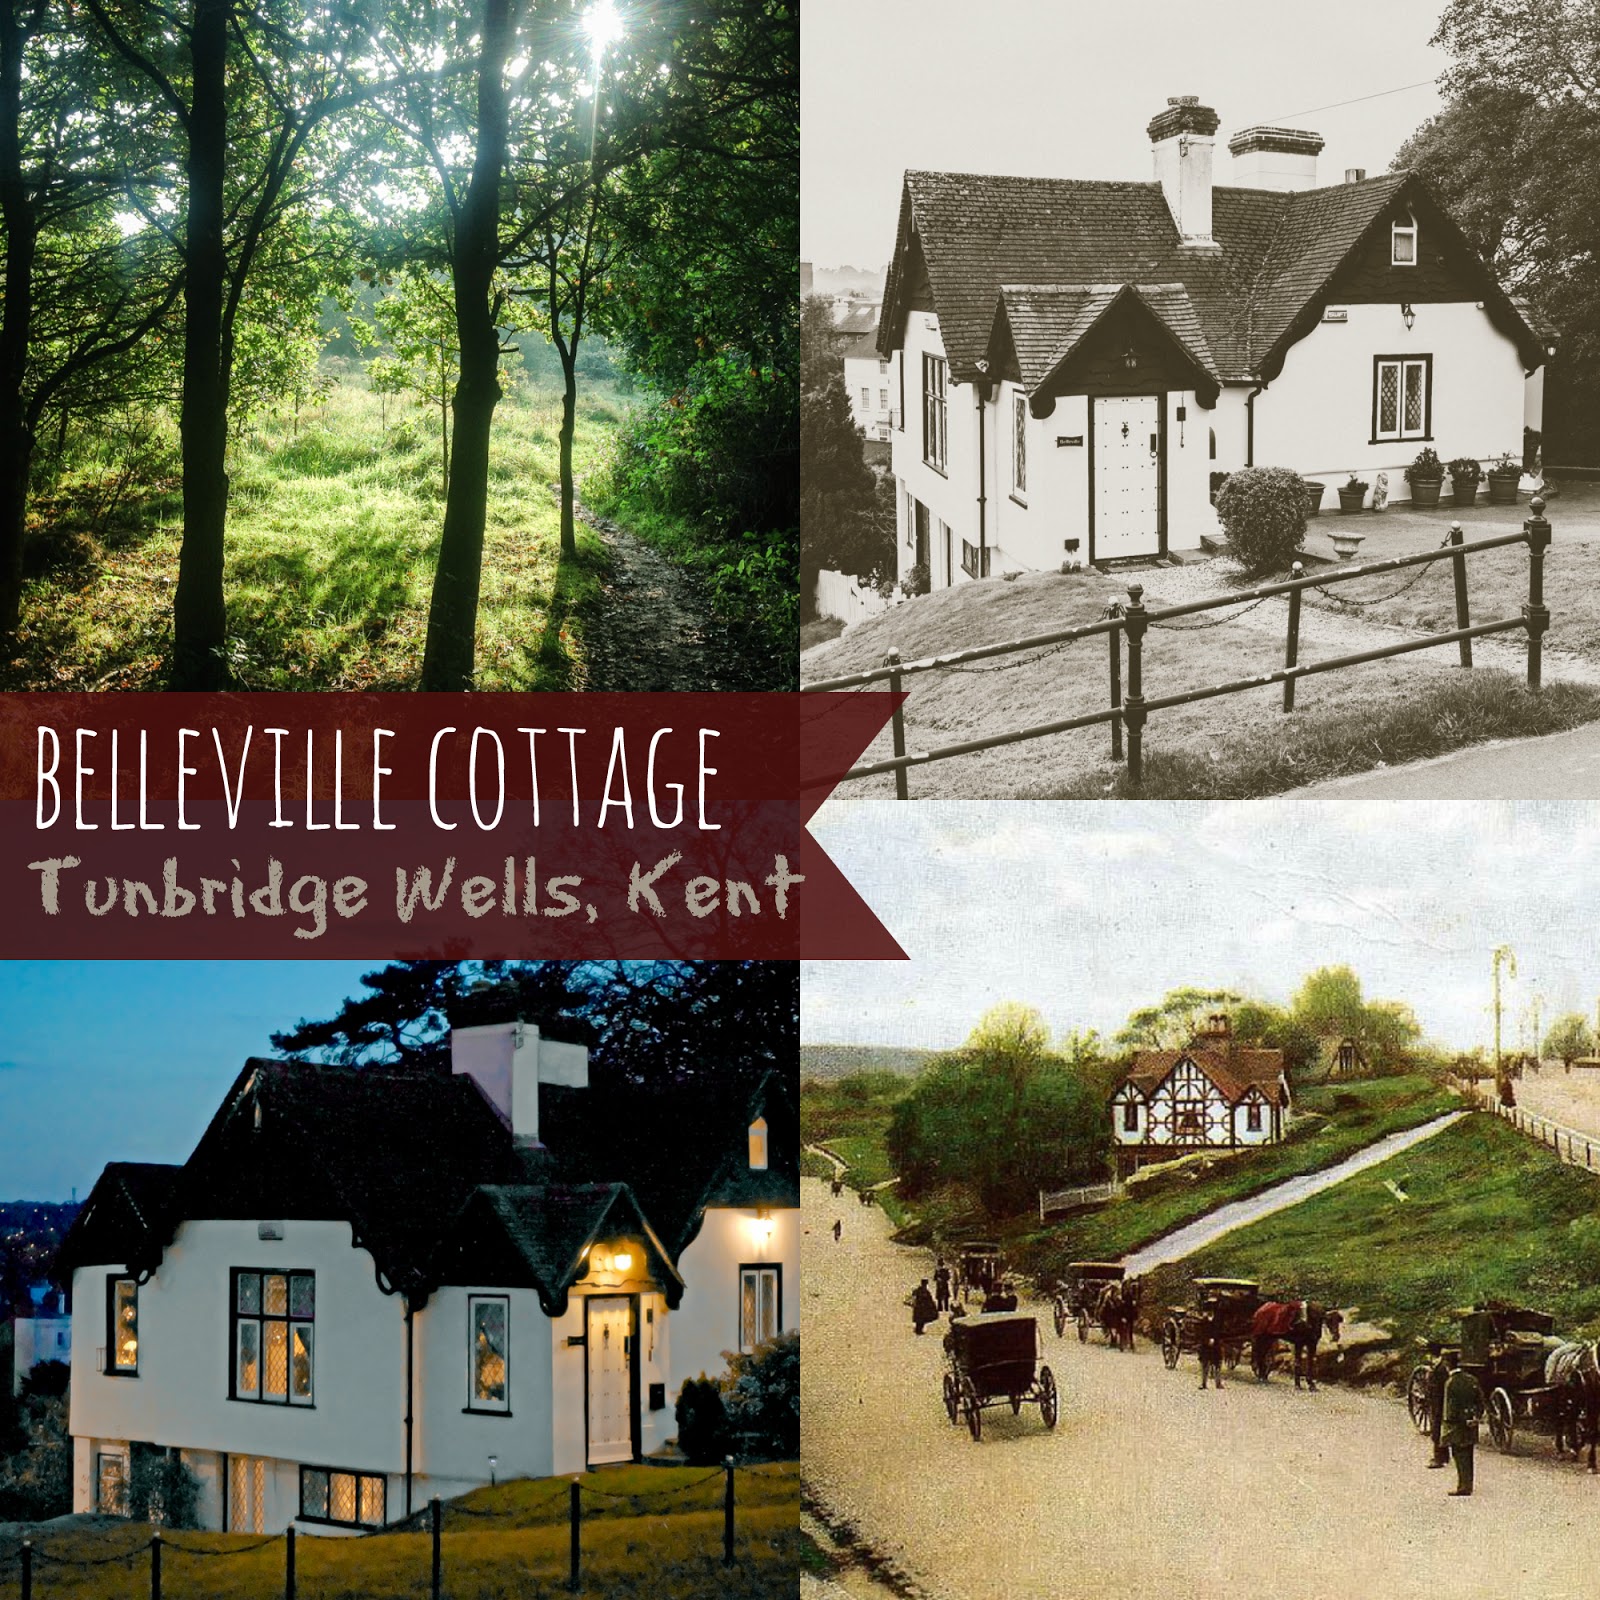 A Handmade Cottage The 300 Year Old Belleville Cottage In Royal